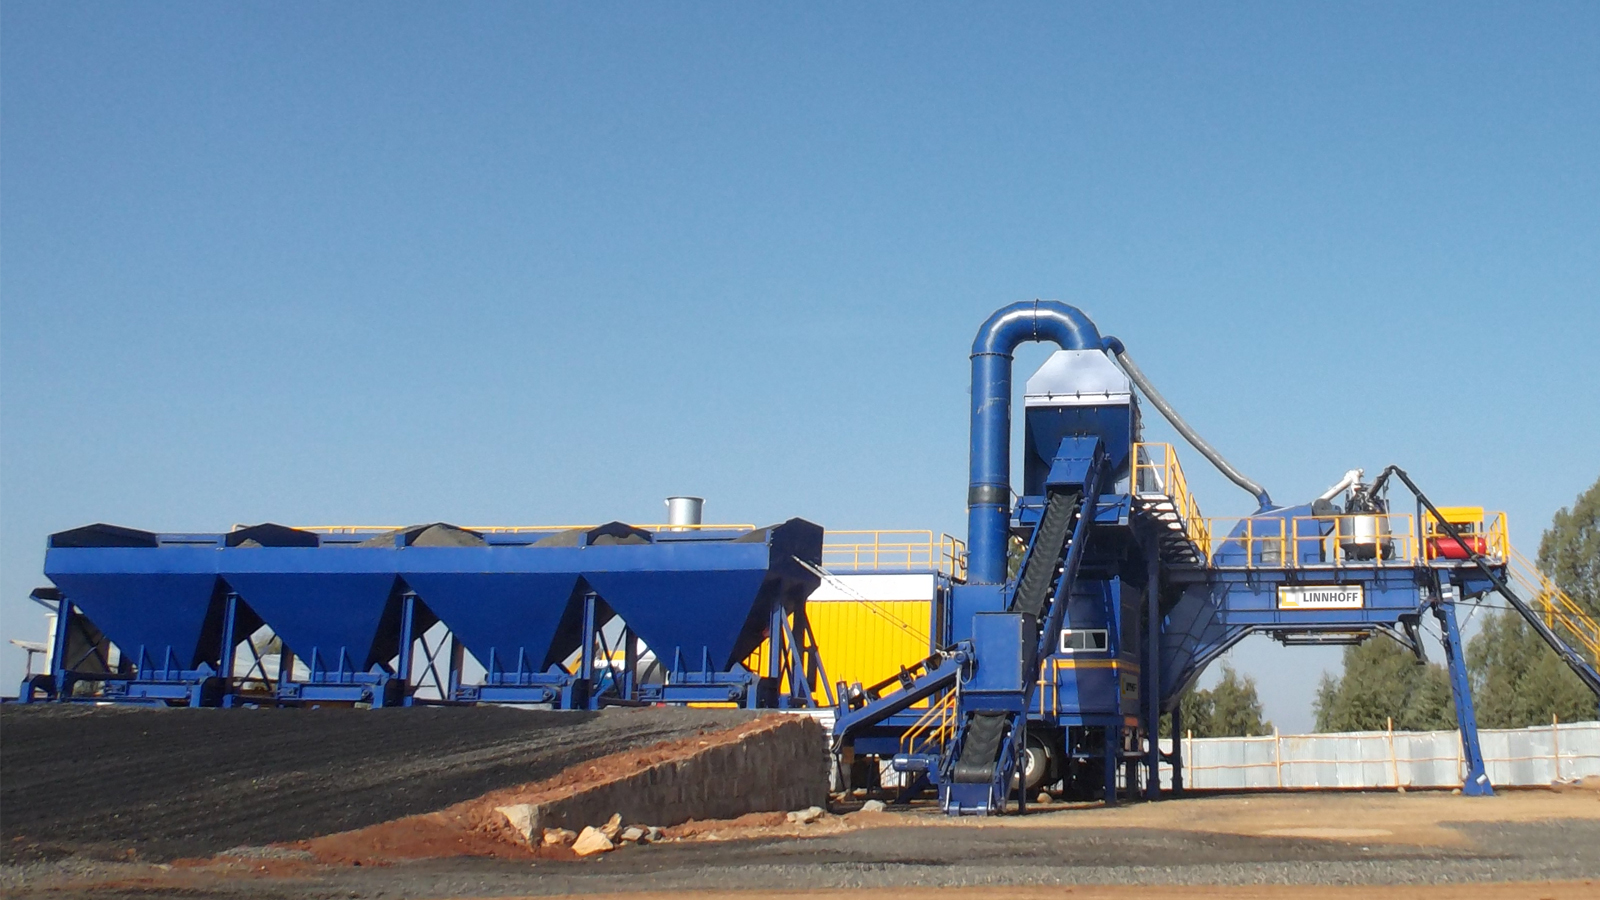  The Linnhoff TSD 1500 MobileMix asphalt plant enables contractors to relocate the plant swiftly between projects